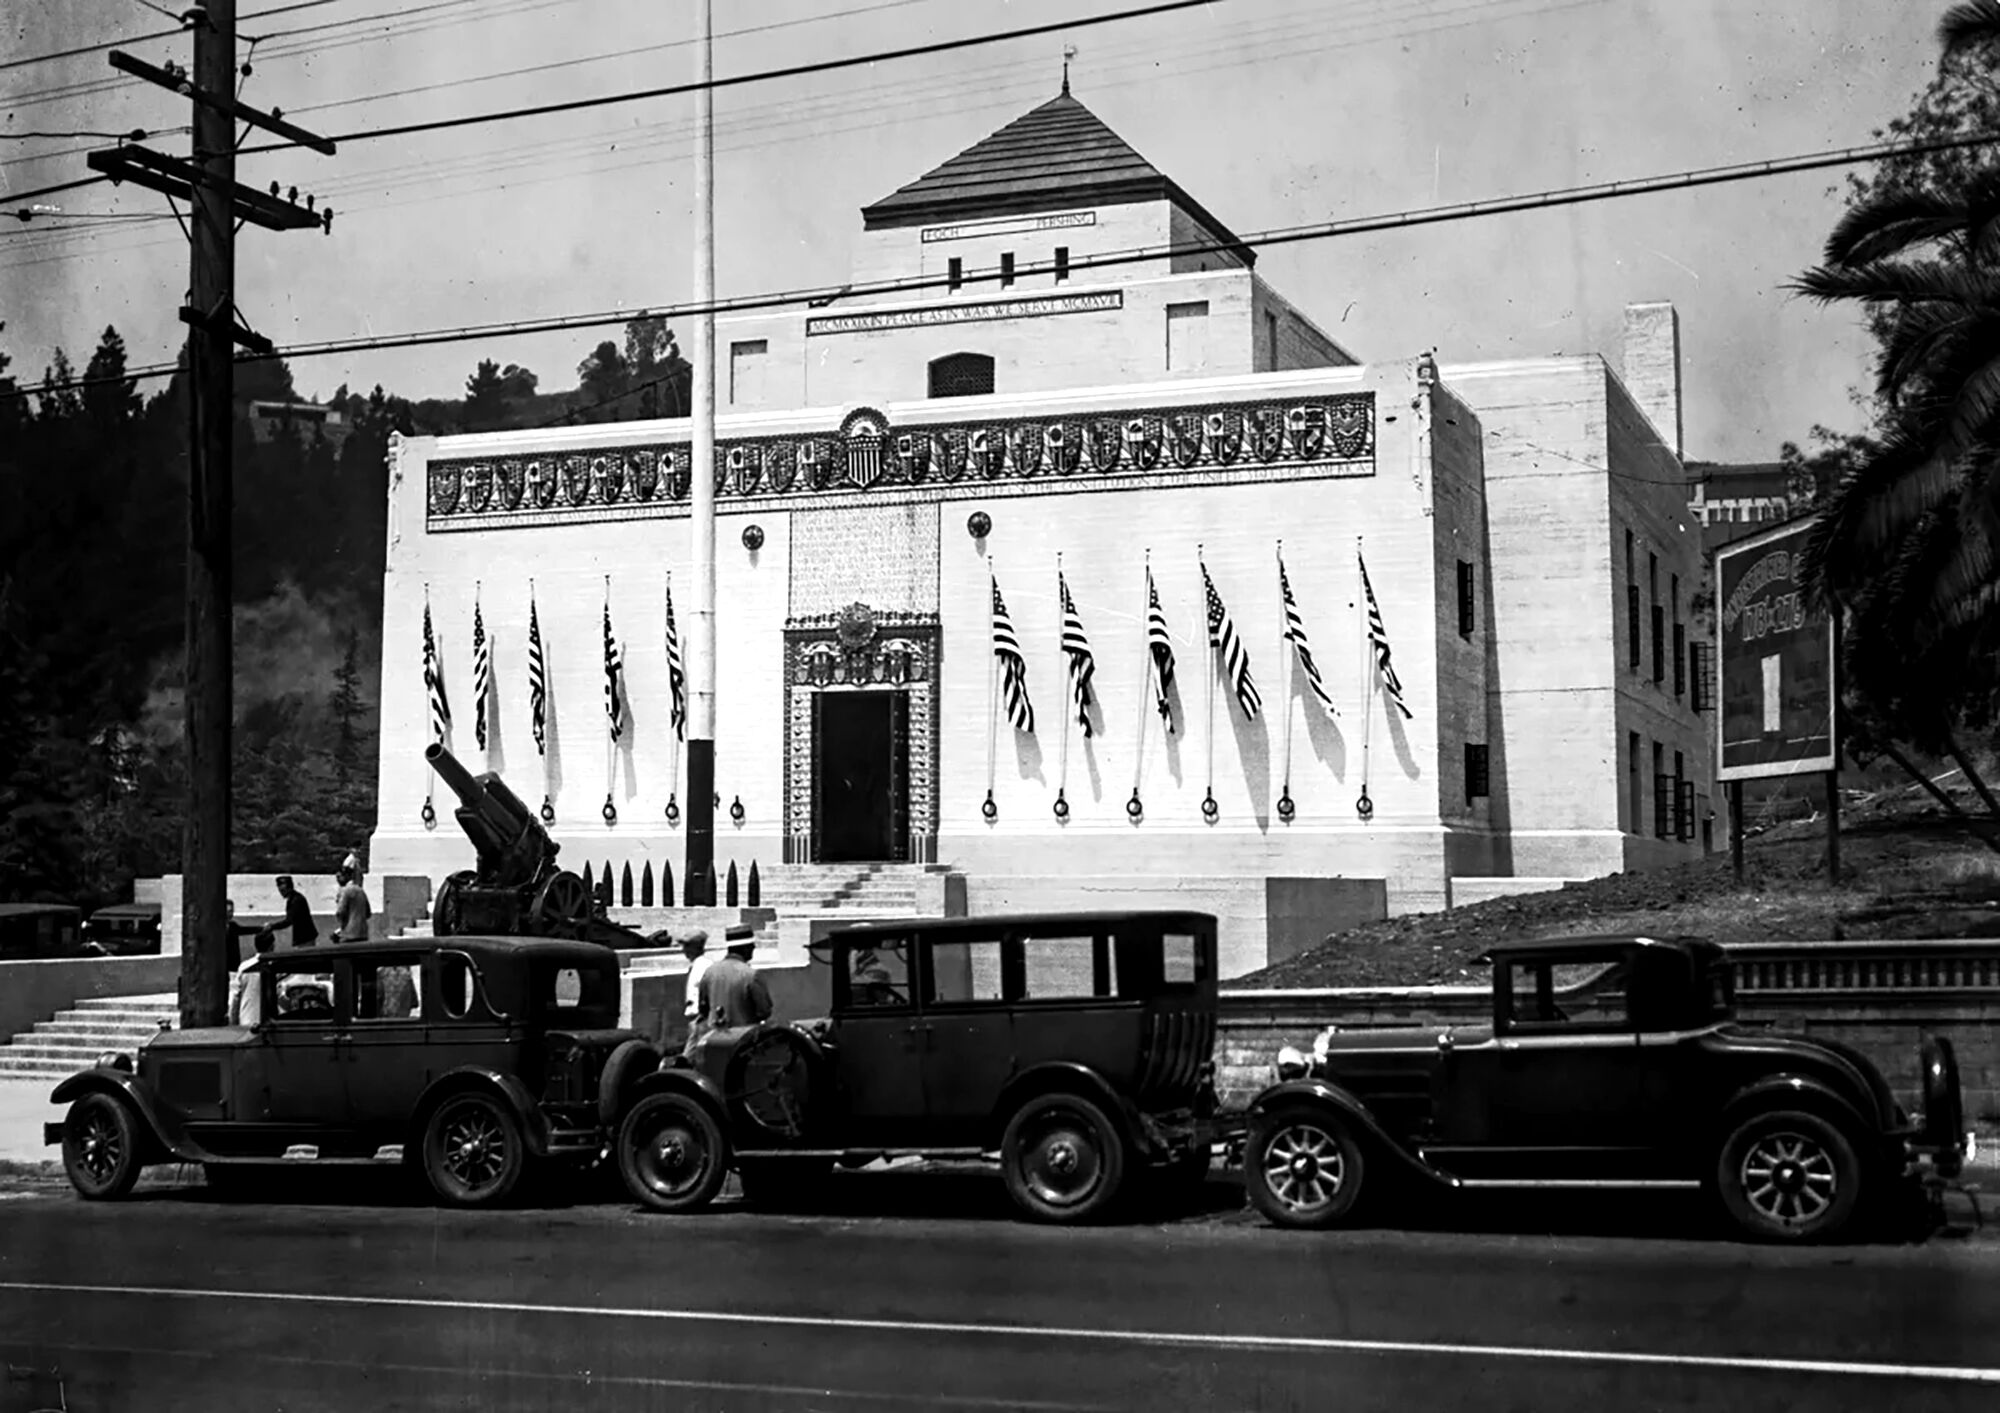 1920s automobiles are lined up in front of an American flag-lined Egyptian Revival-style building, with a cannon in between